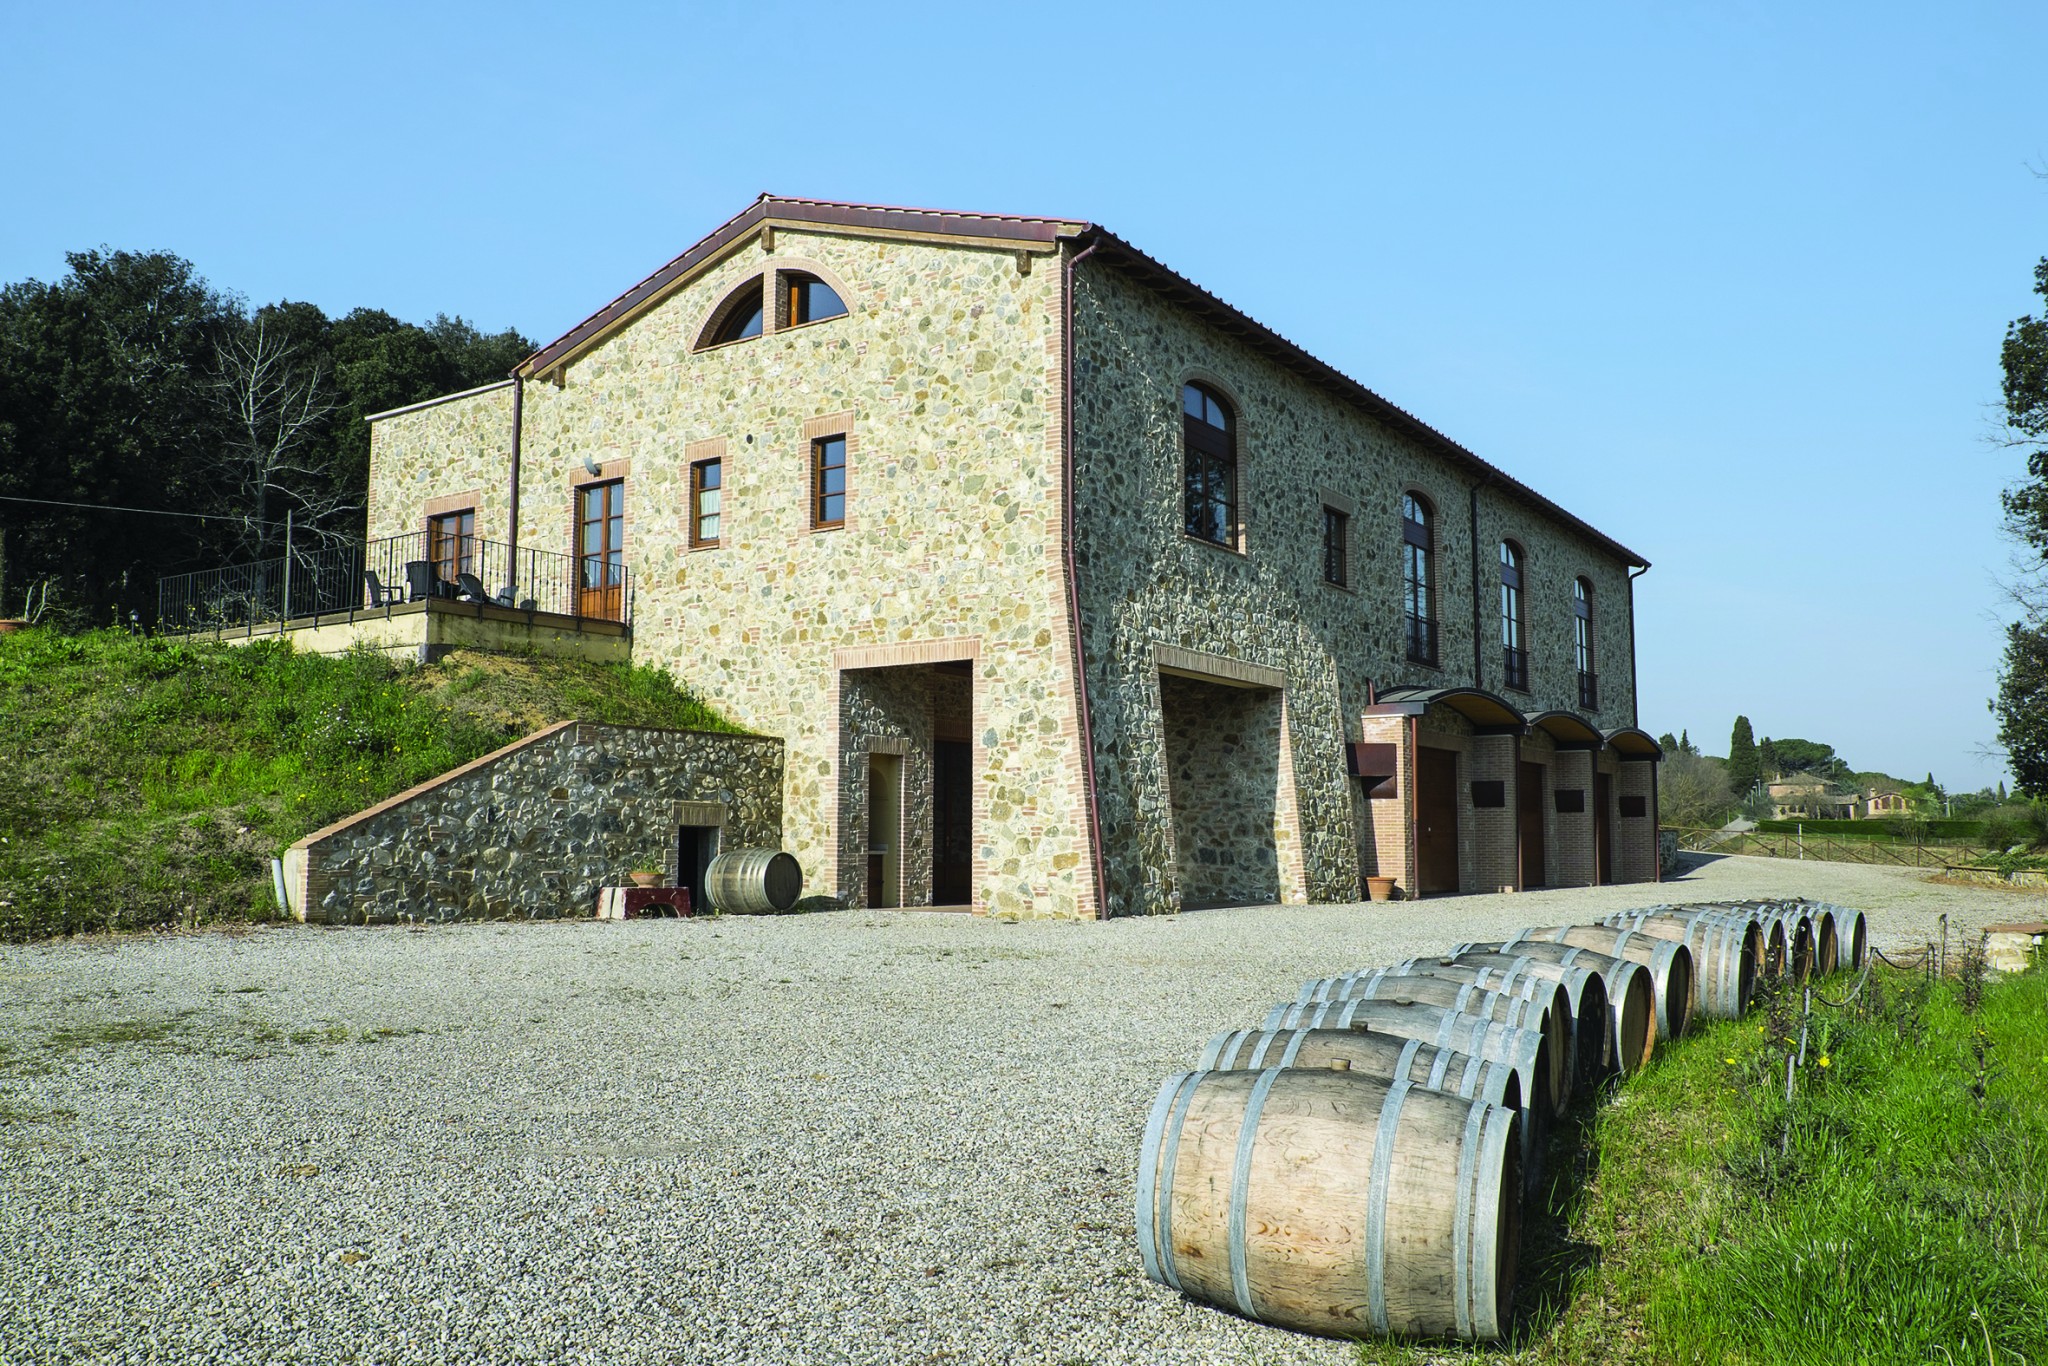 Winemaking and aging